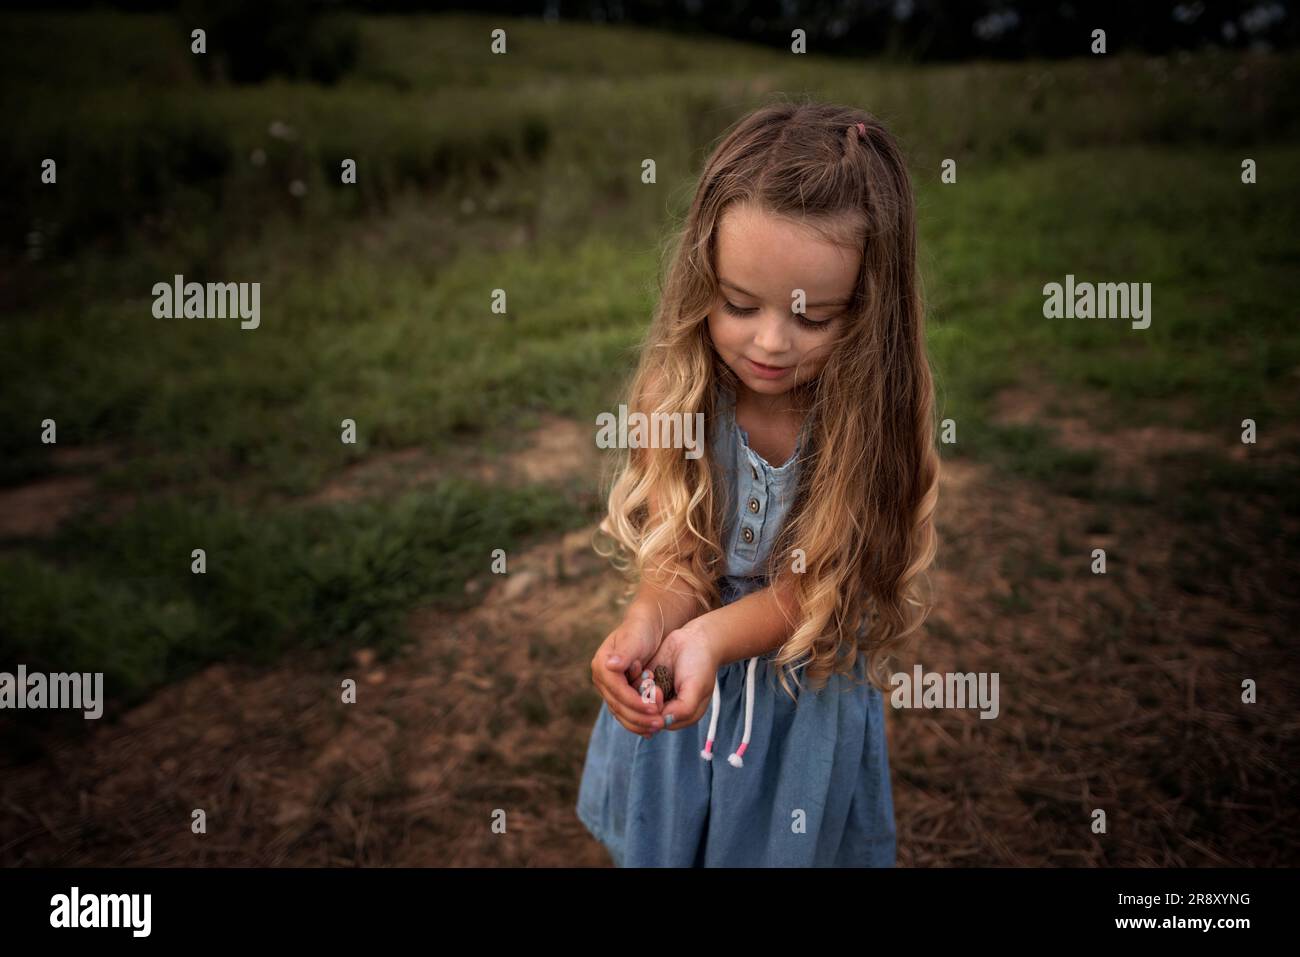 Little girl holding tiny frog and smiling in grassy field Stock Photo